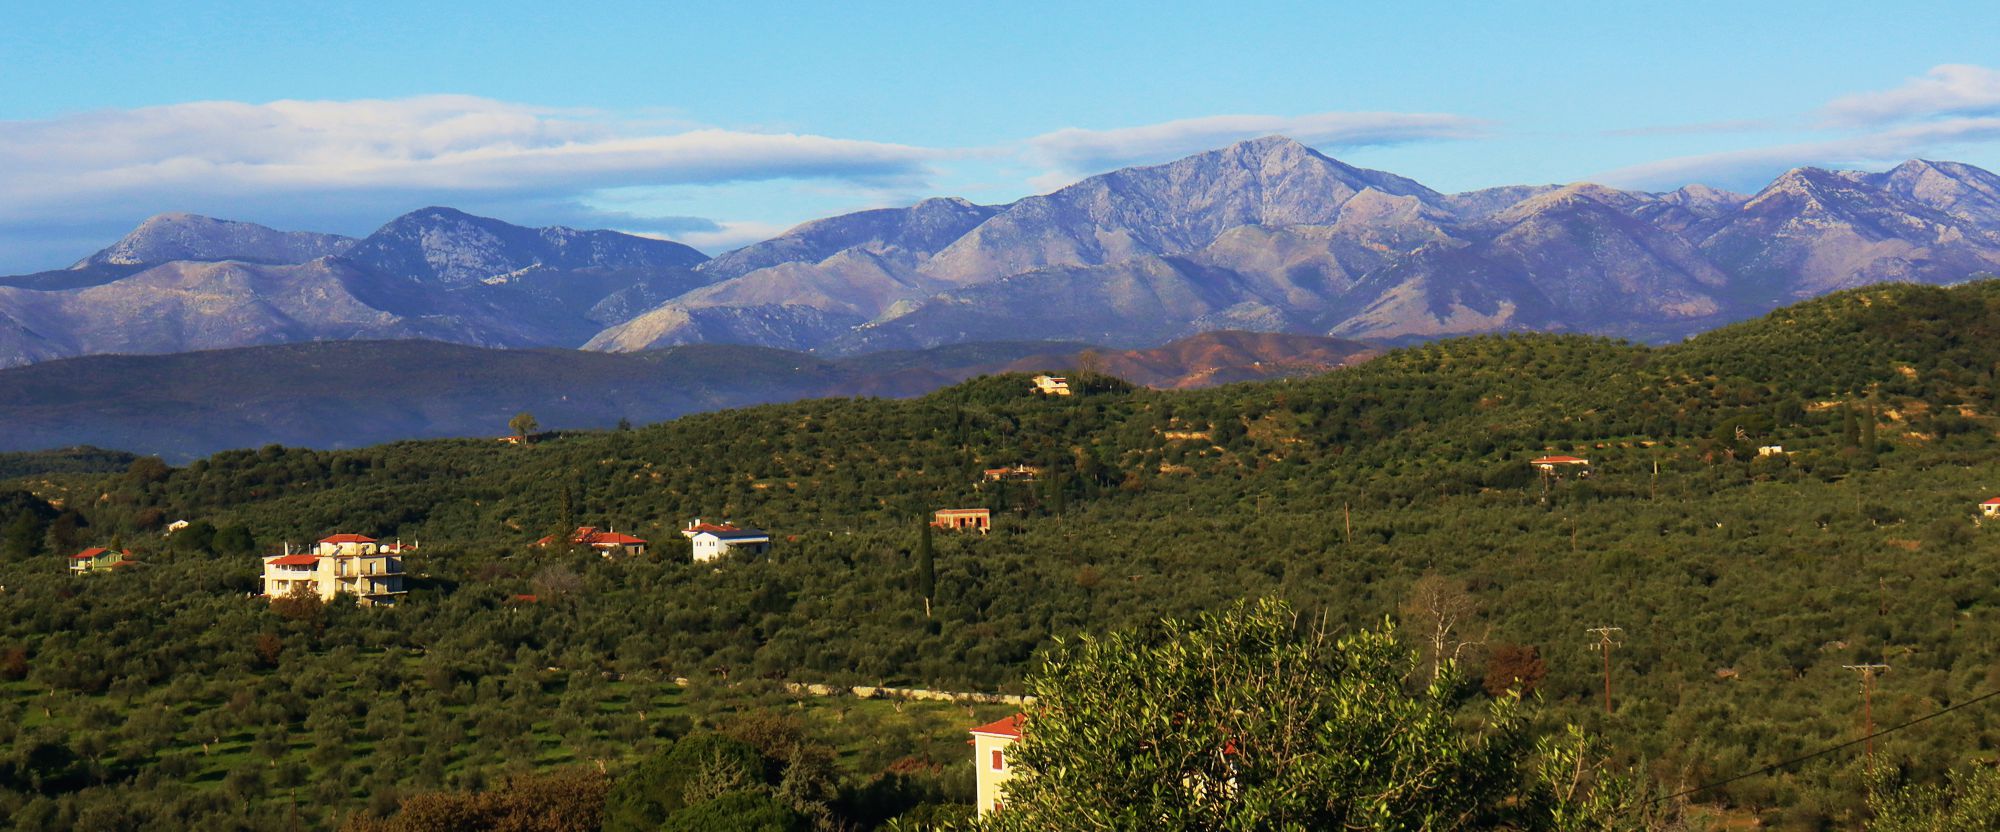 Gythio topoguide: The outskirts of Mt Taygetos deominate a typical mountainous landscape